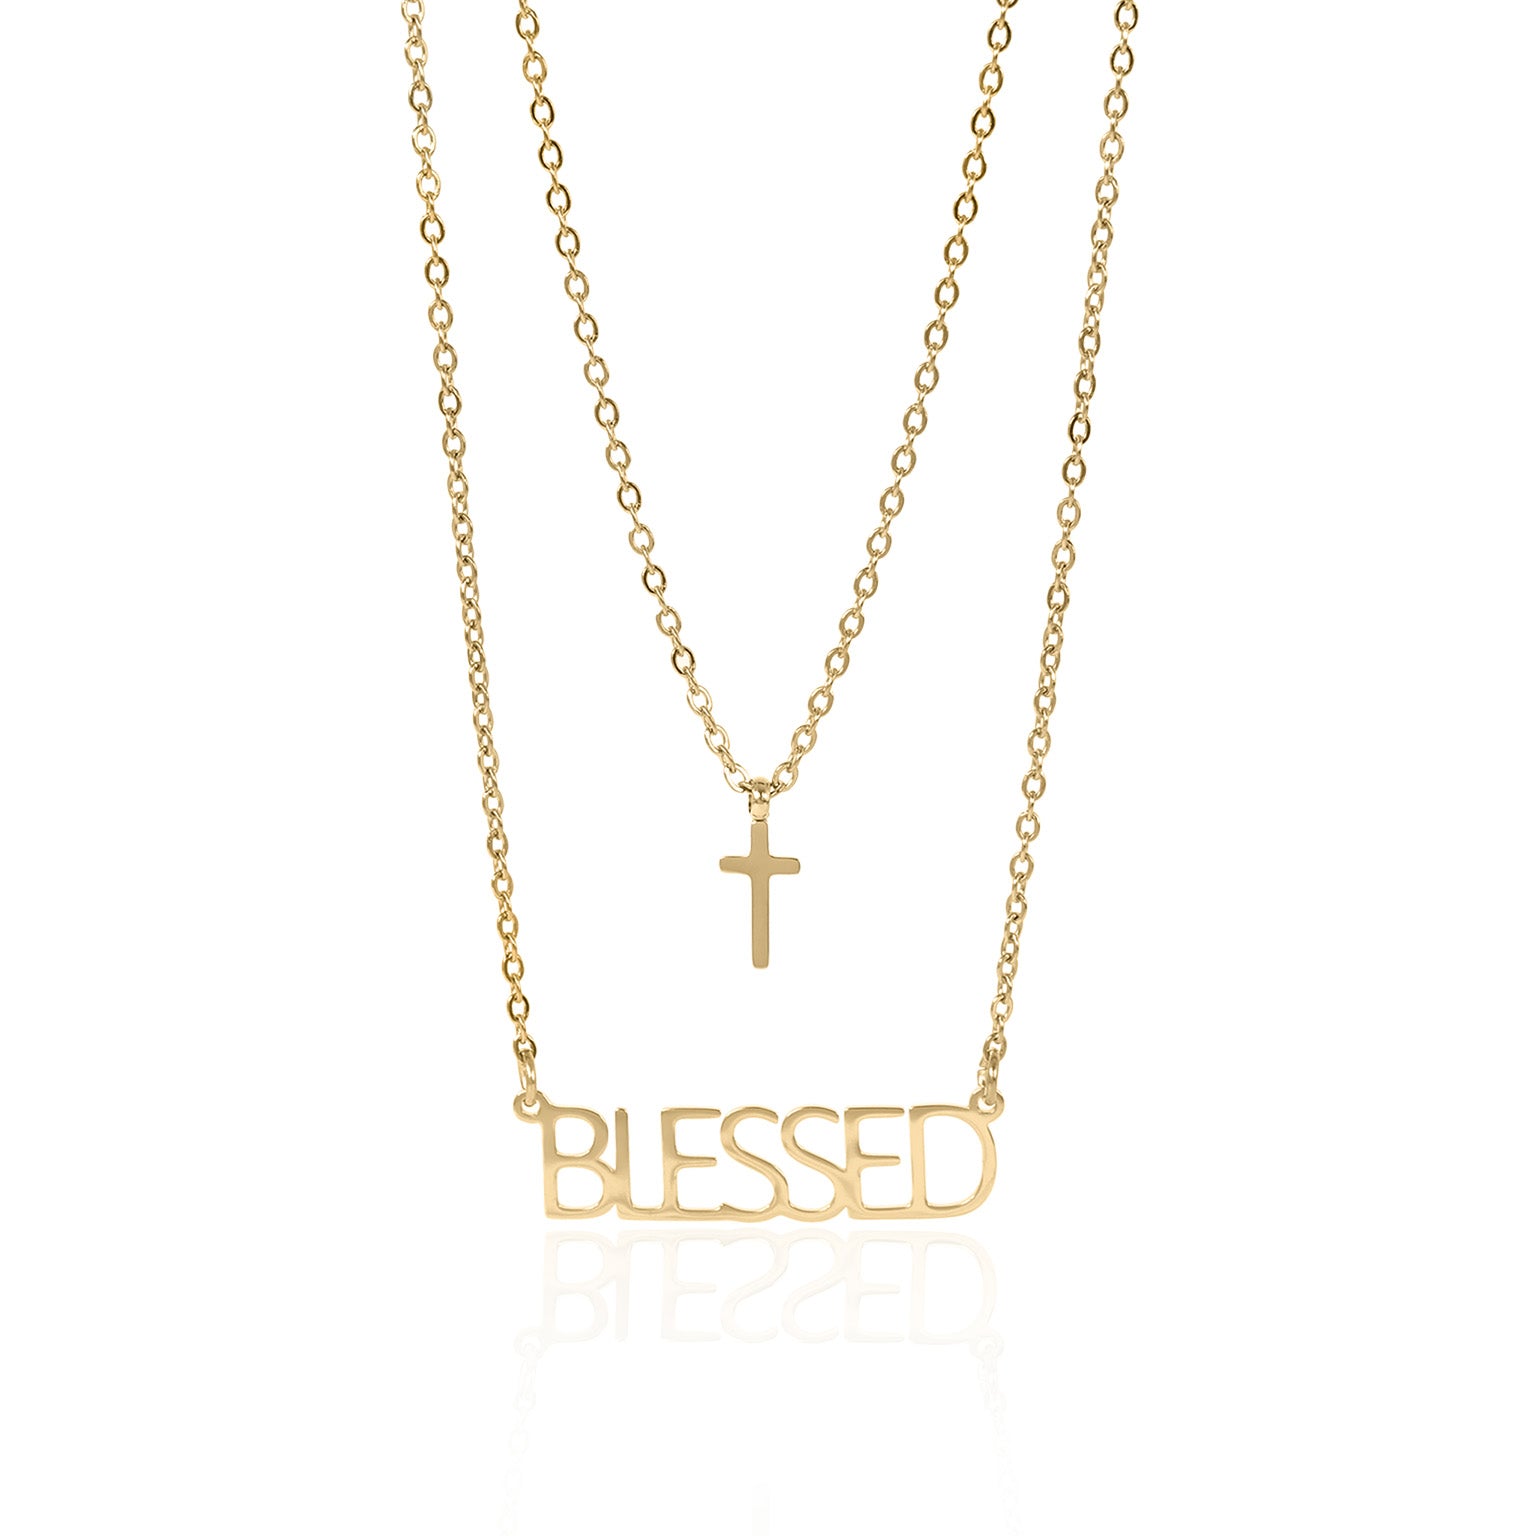 Stainless Steel PVD Coated "Blessed" Layered Cross Charm Necklace